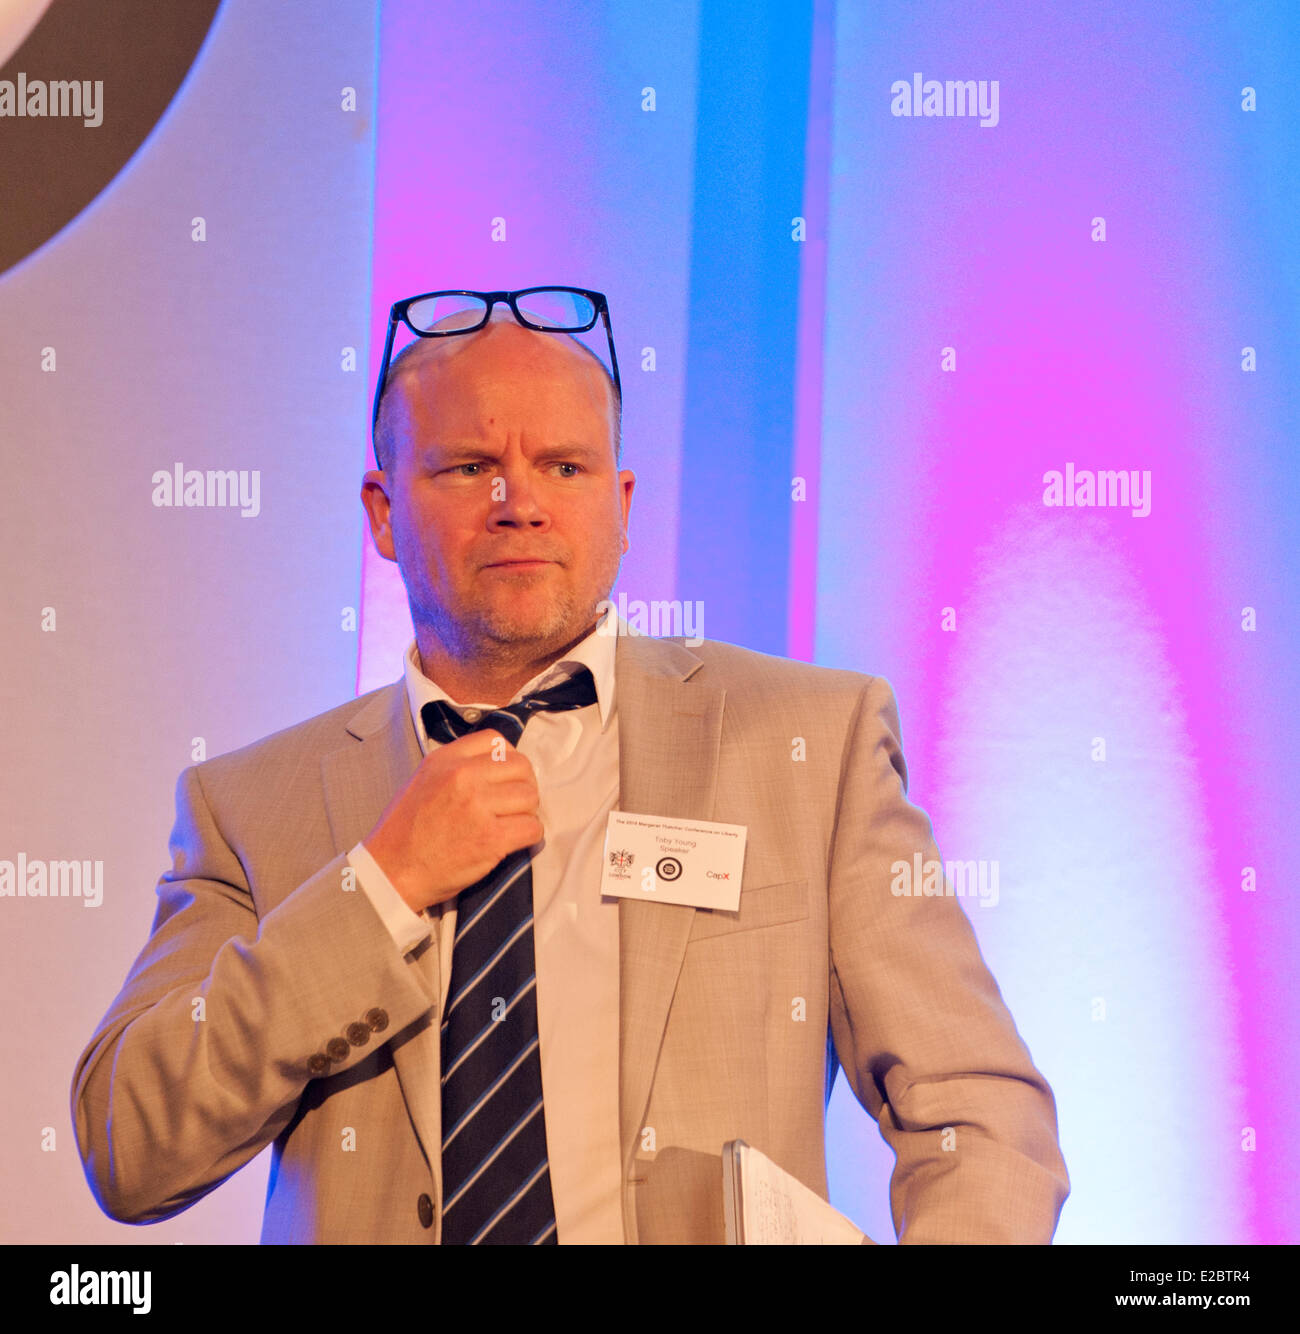 London, UK. 18th June, 2014. Toby Young at the Margaret Thatcher Conference on Liberty 18th June 2014 Guildhall London uk Credit:  Prixnews/Alamy Live News Stock Photo